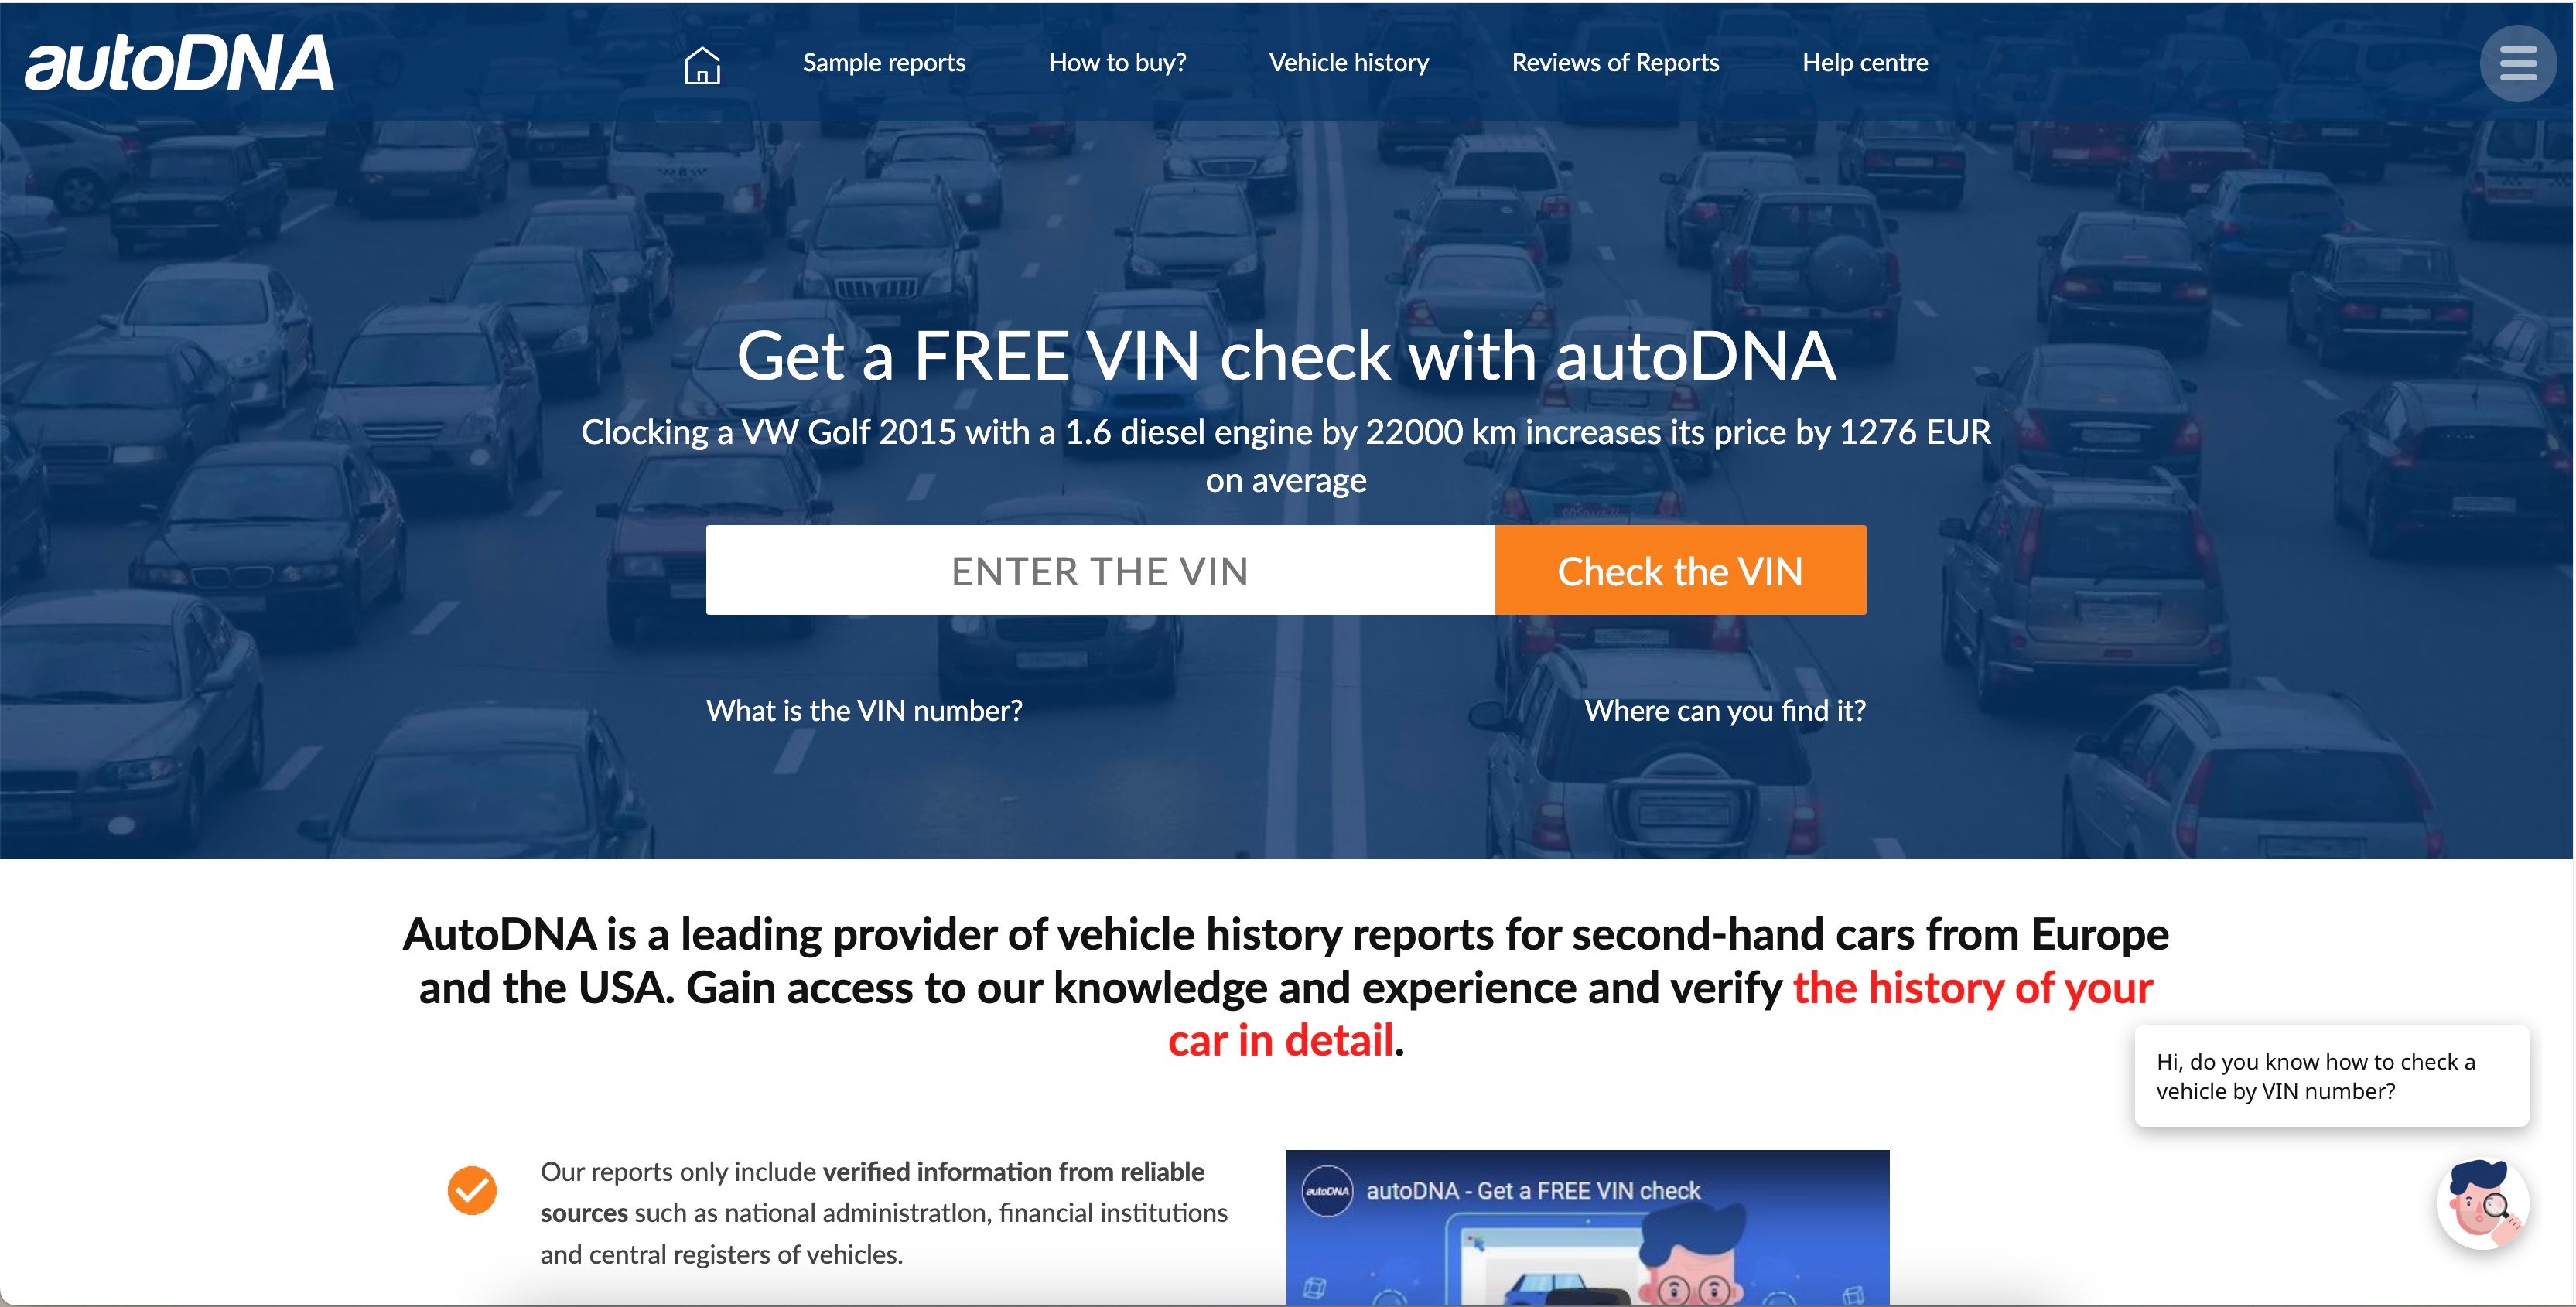 homepage overview of car history website autoDNA